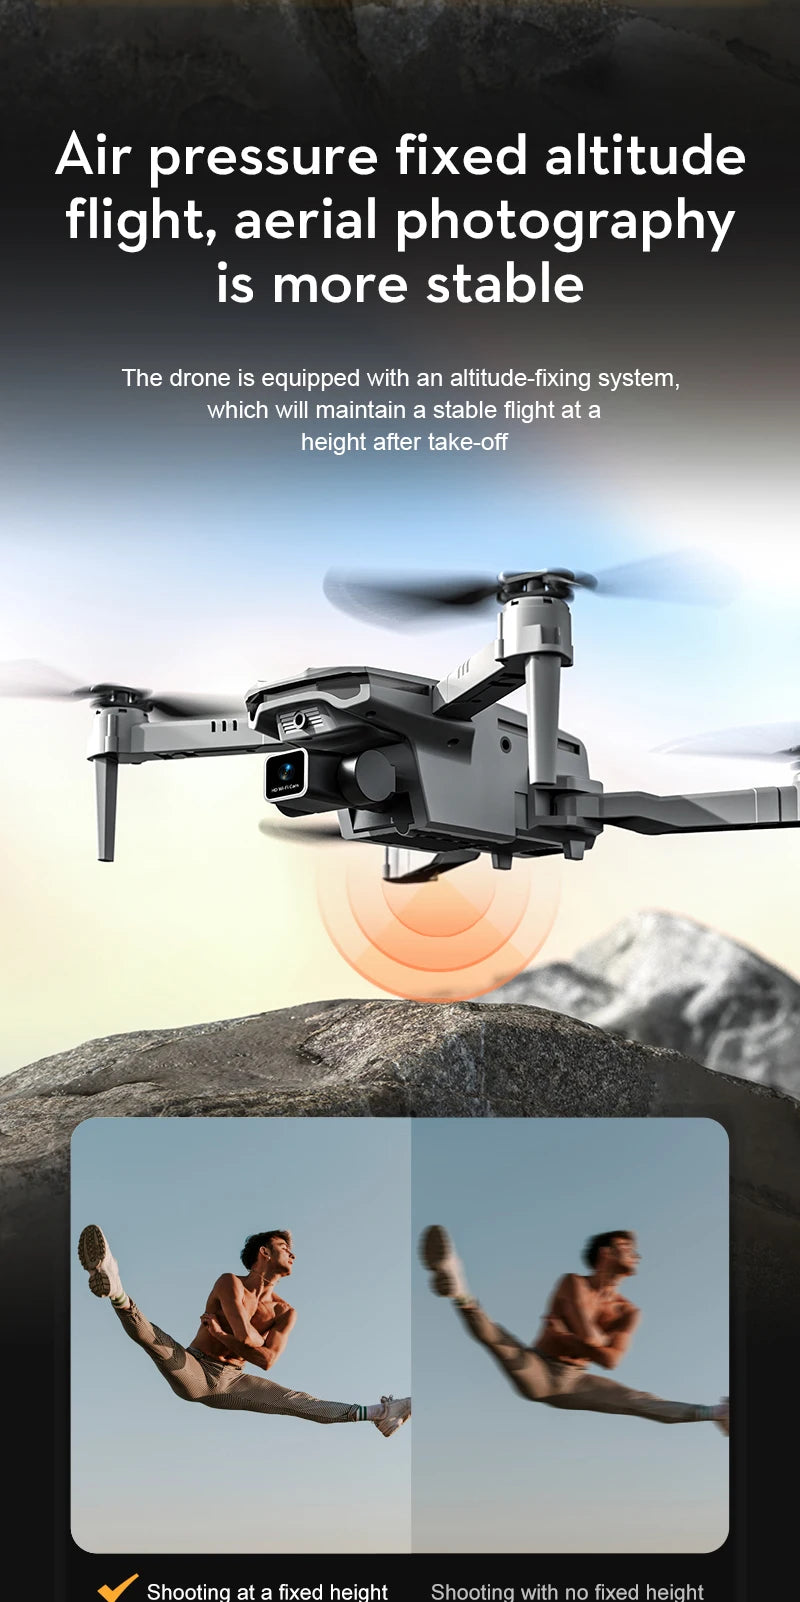 the drone is equipped with an altitude-fixing system .